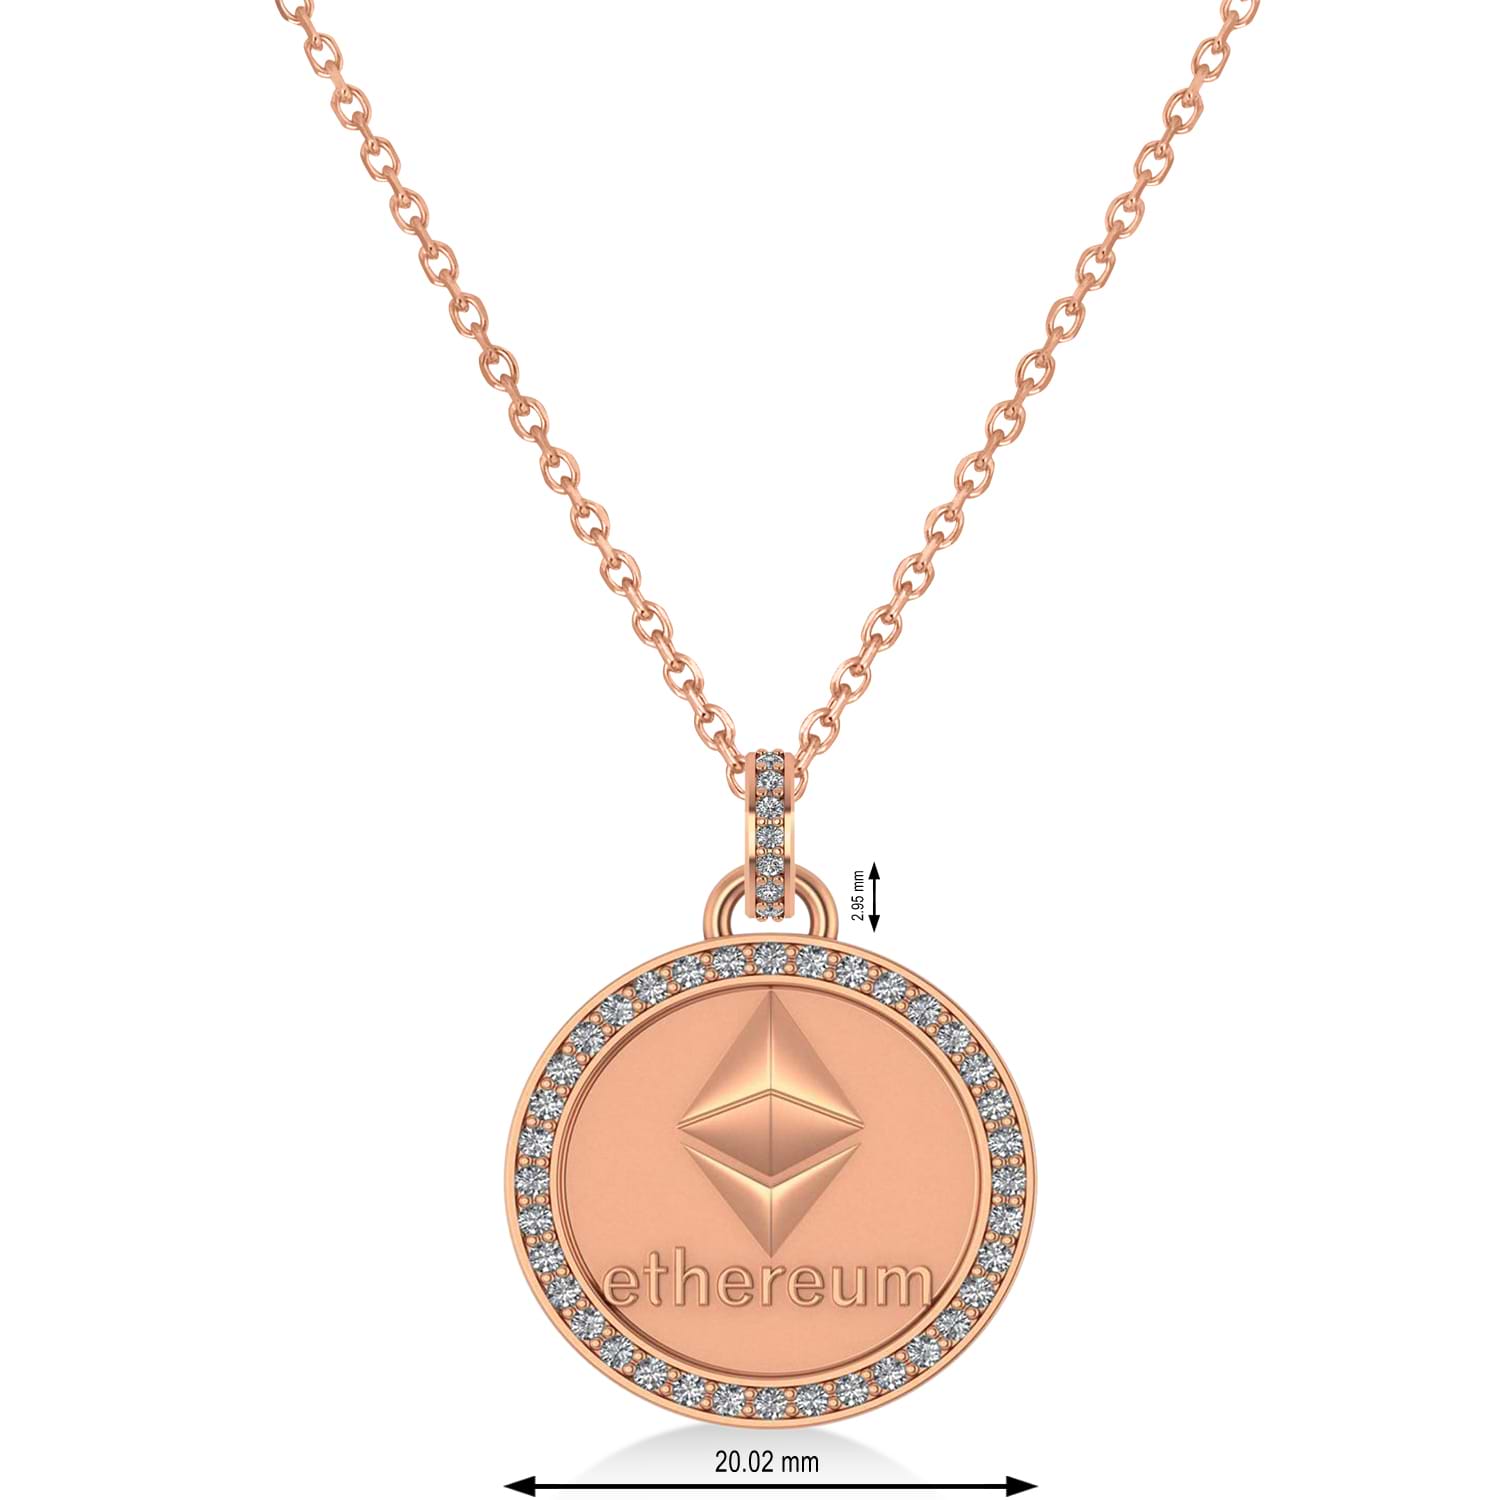 Diamond Cryptocurrency Ethereum Pendant Necklace With Bail 14k Rose Gold (0.44ct)